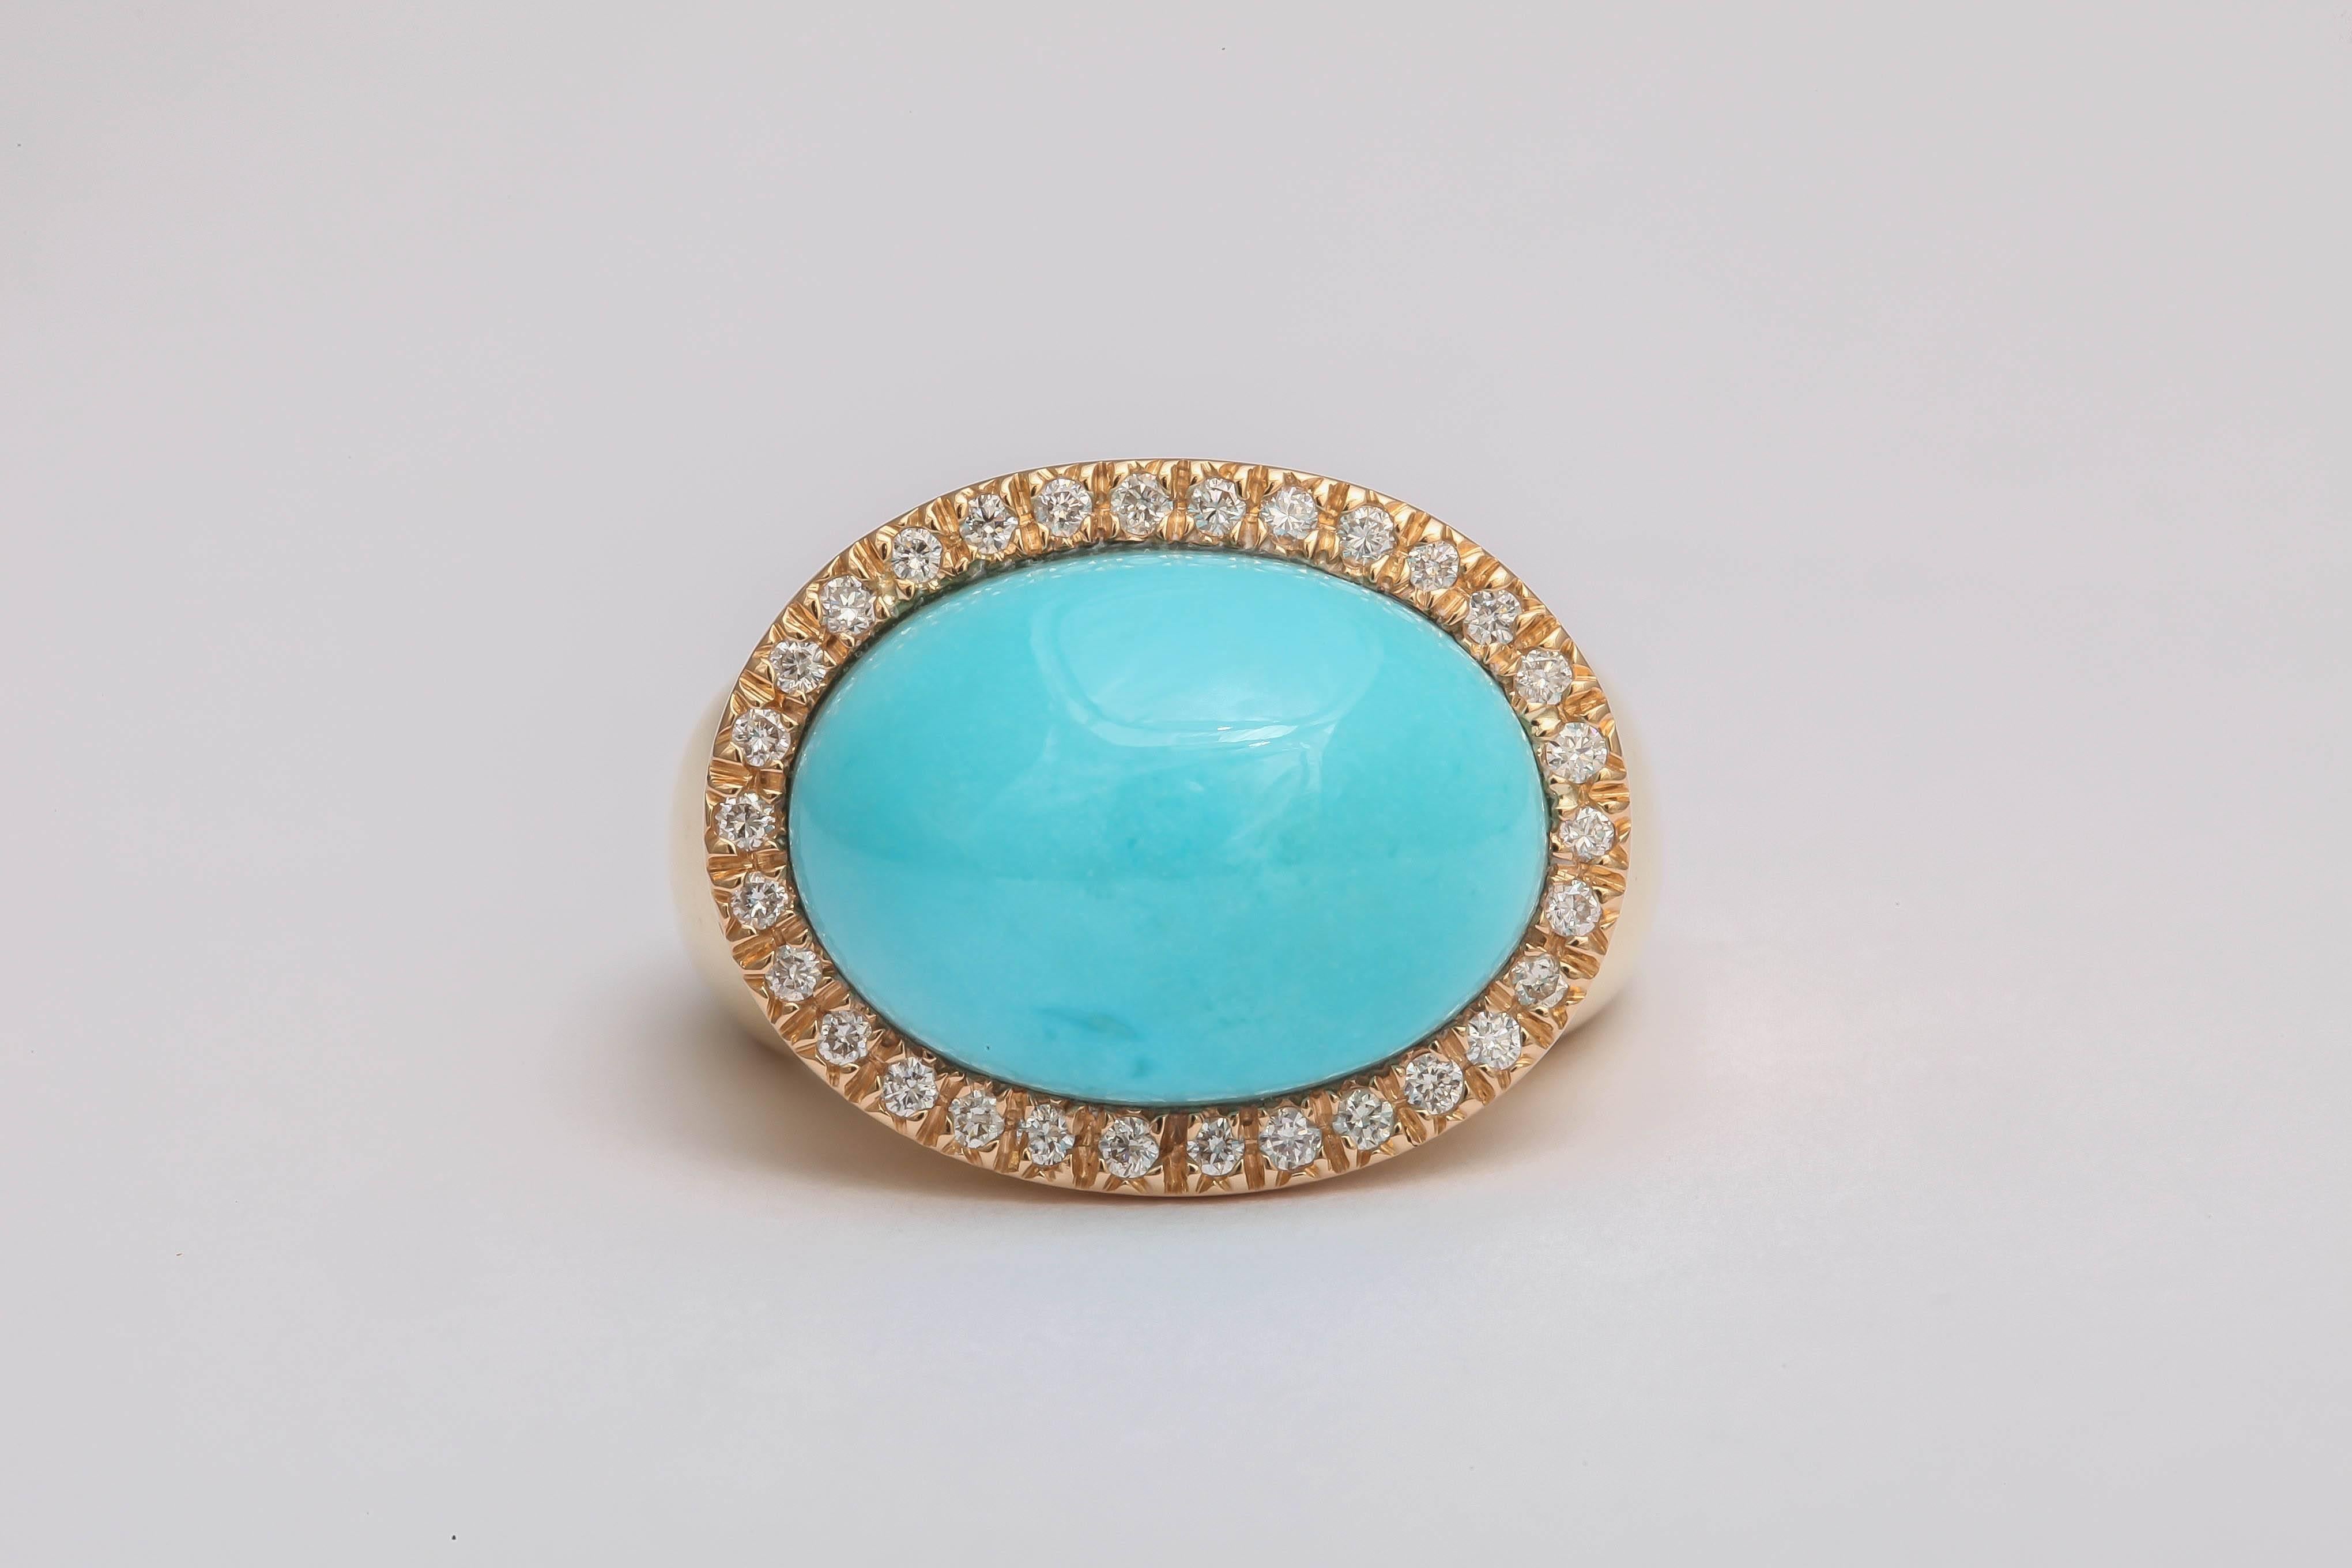 18k yellow gold, turquoise and white diamonds ring.